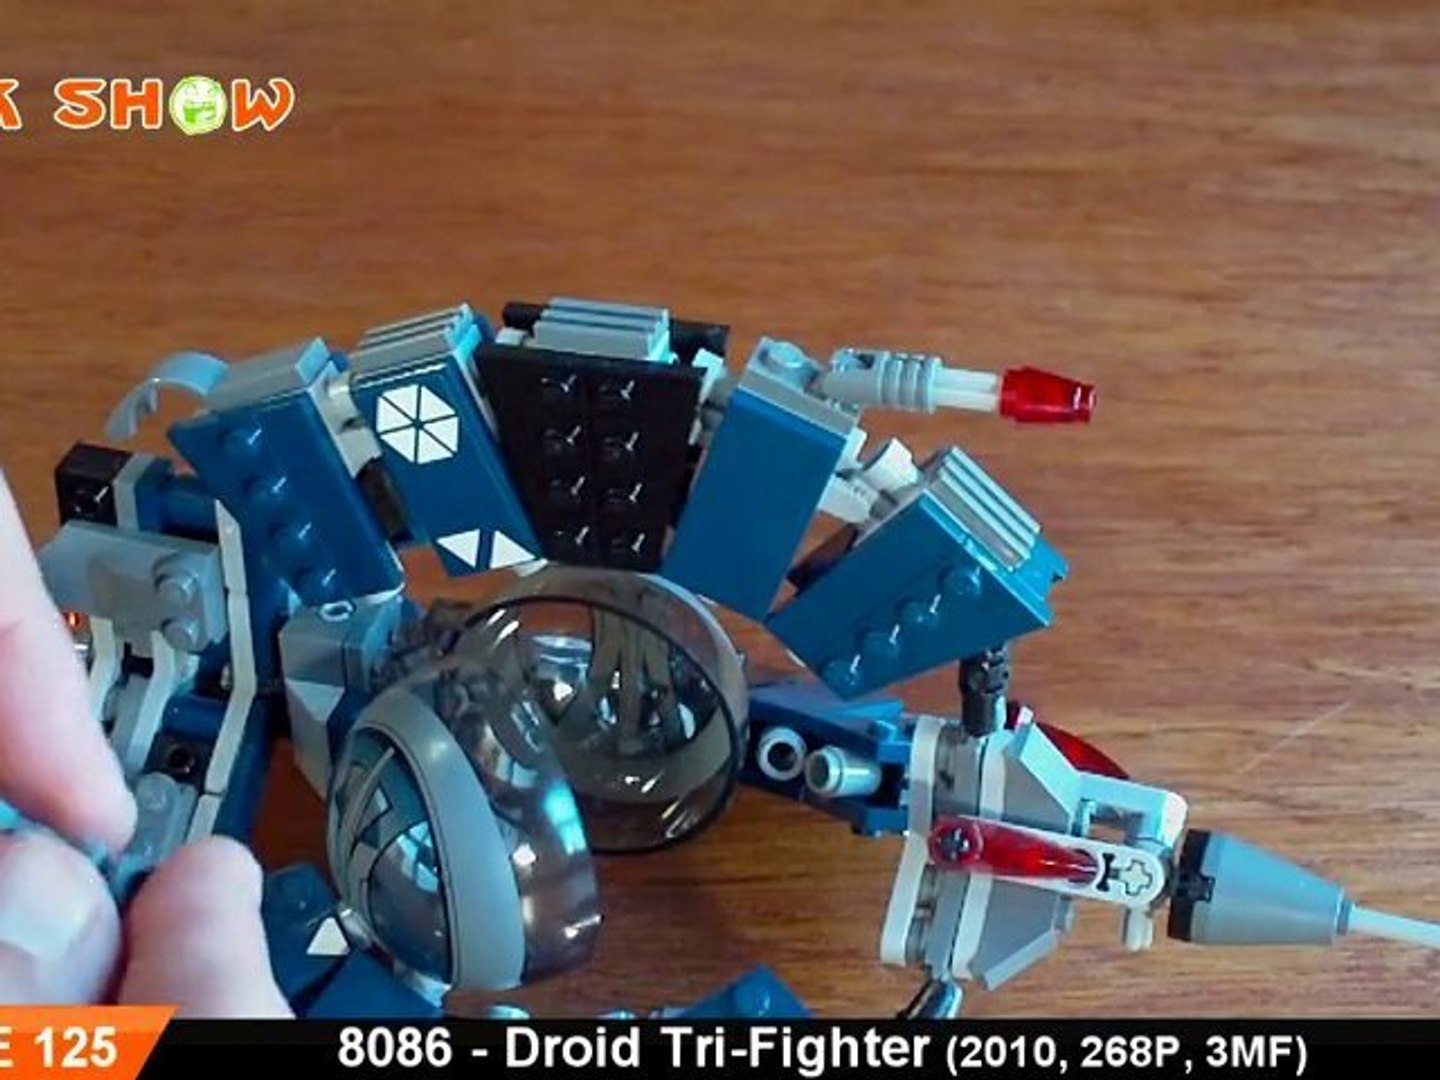 LEGO Star Wars Droid Tri-Fighter Review : LEGO 8086